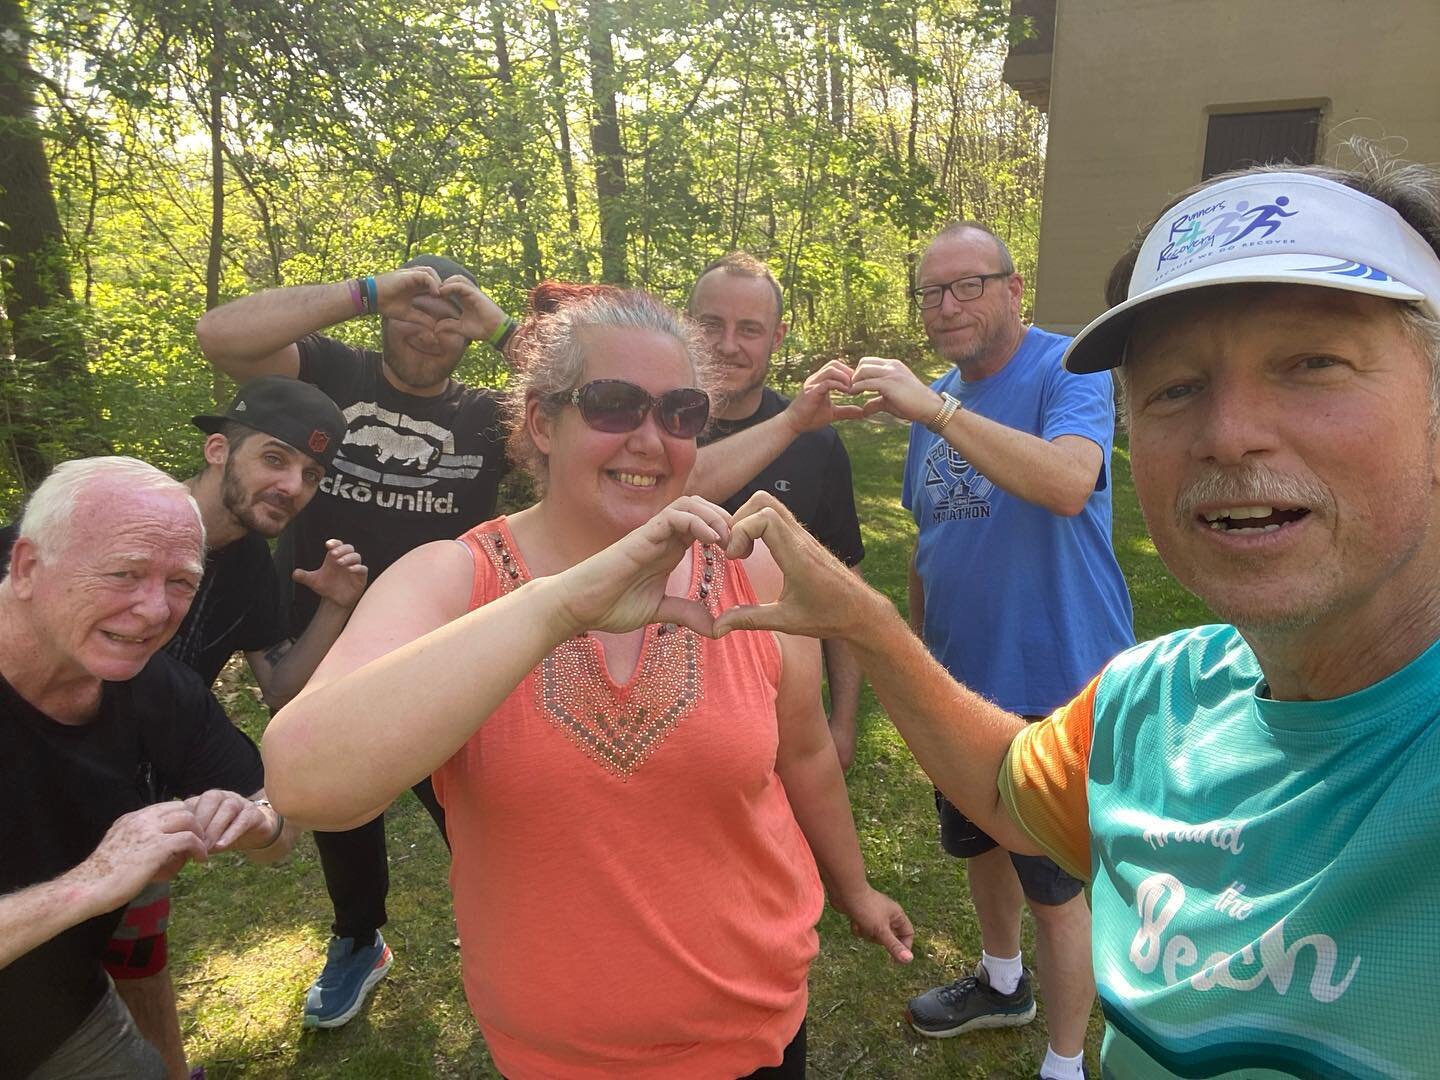 Lots of love at the Kent group tonight. Come join us Wednesdays at 4:30 pm.

#teamrunning2bwell #ActivateHealing
#Running2bwell #ActivateHappy #exerciseismedicine #ADMBoard #Exchange #turkeyburner5k #around the beach 5k
#fleetfeetcleveland